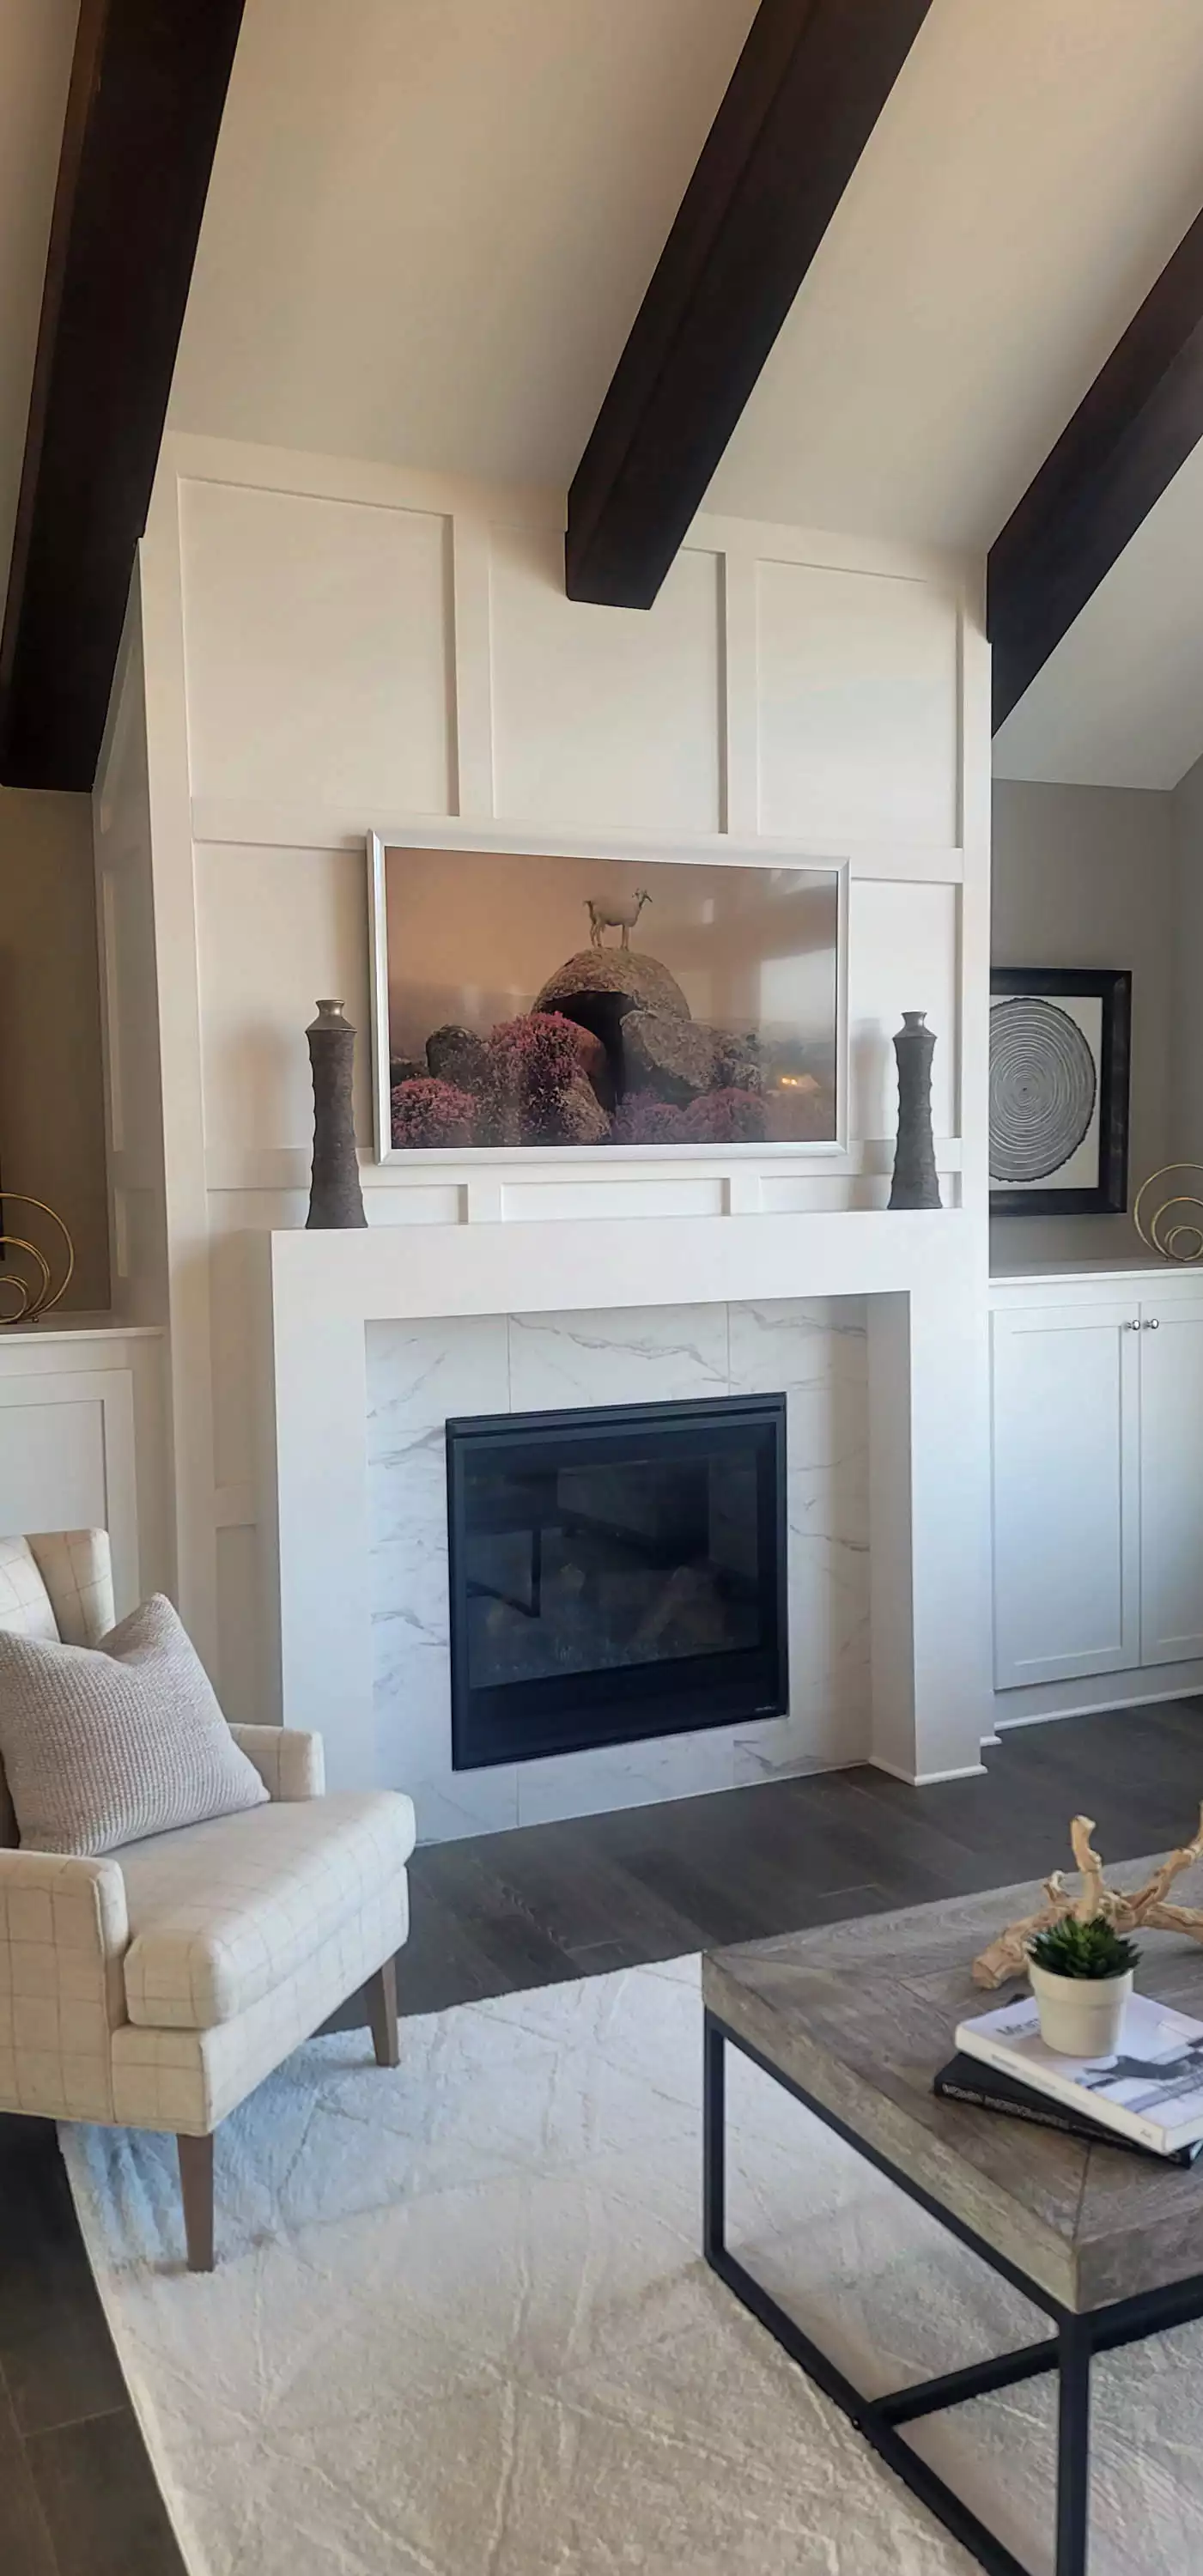 Custom designed fireplace all with flanking built-ins